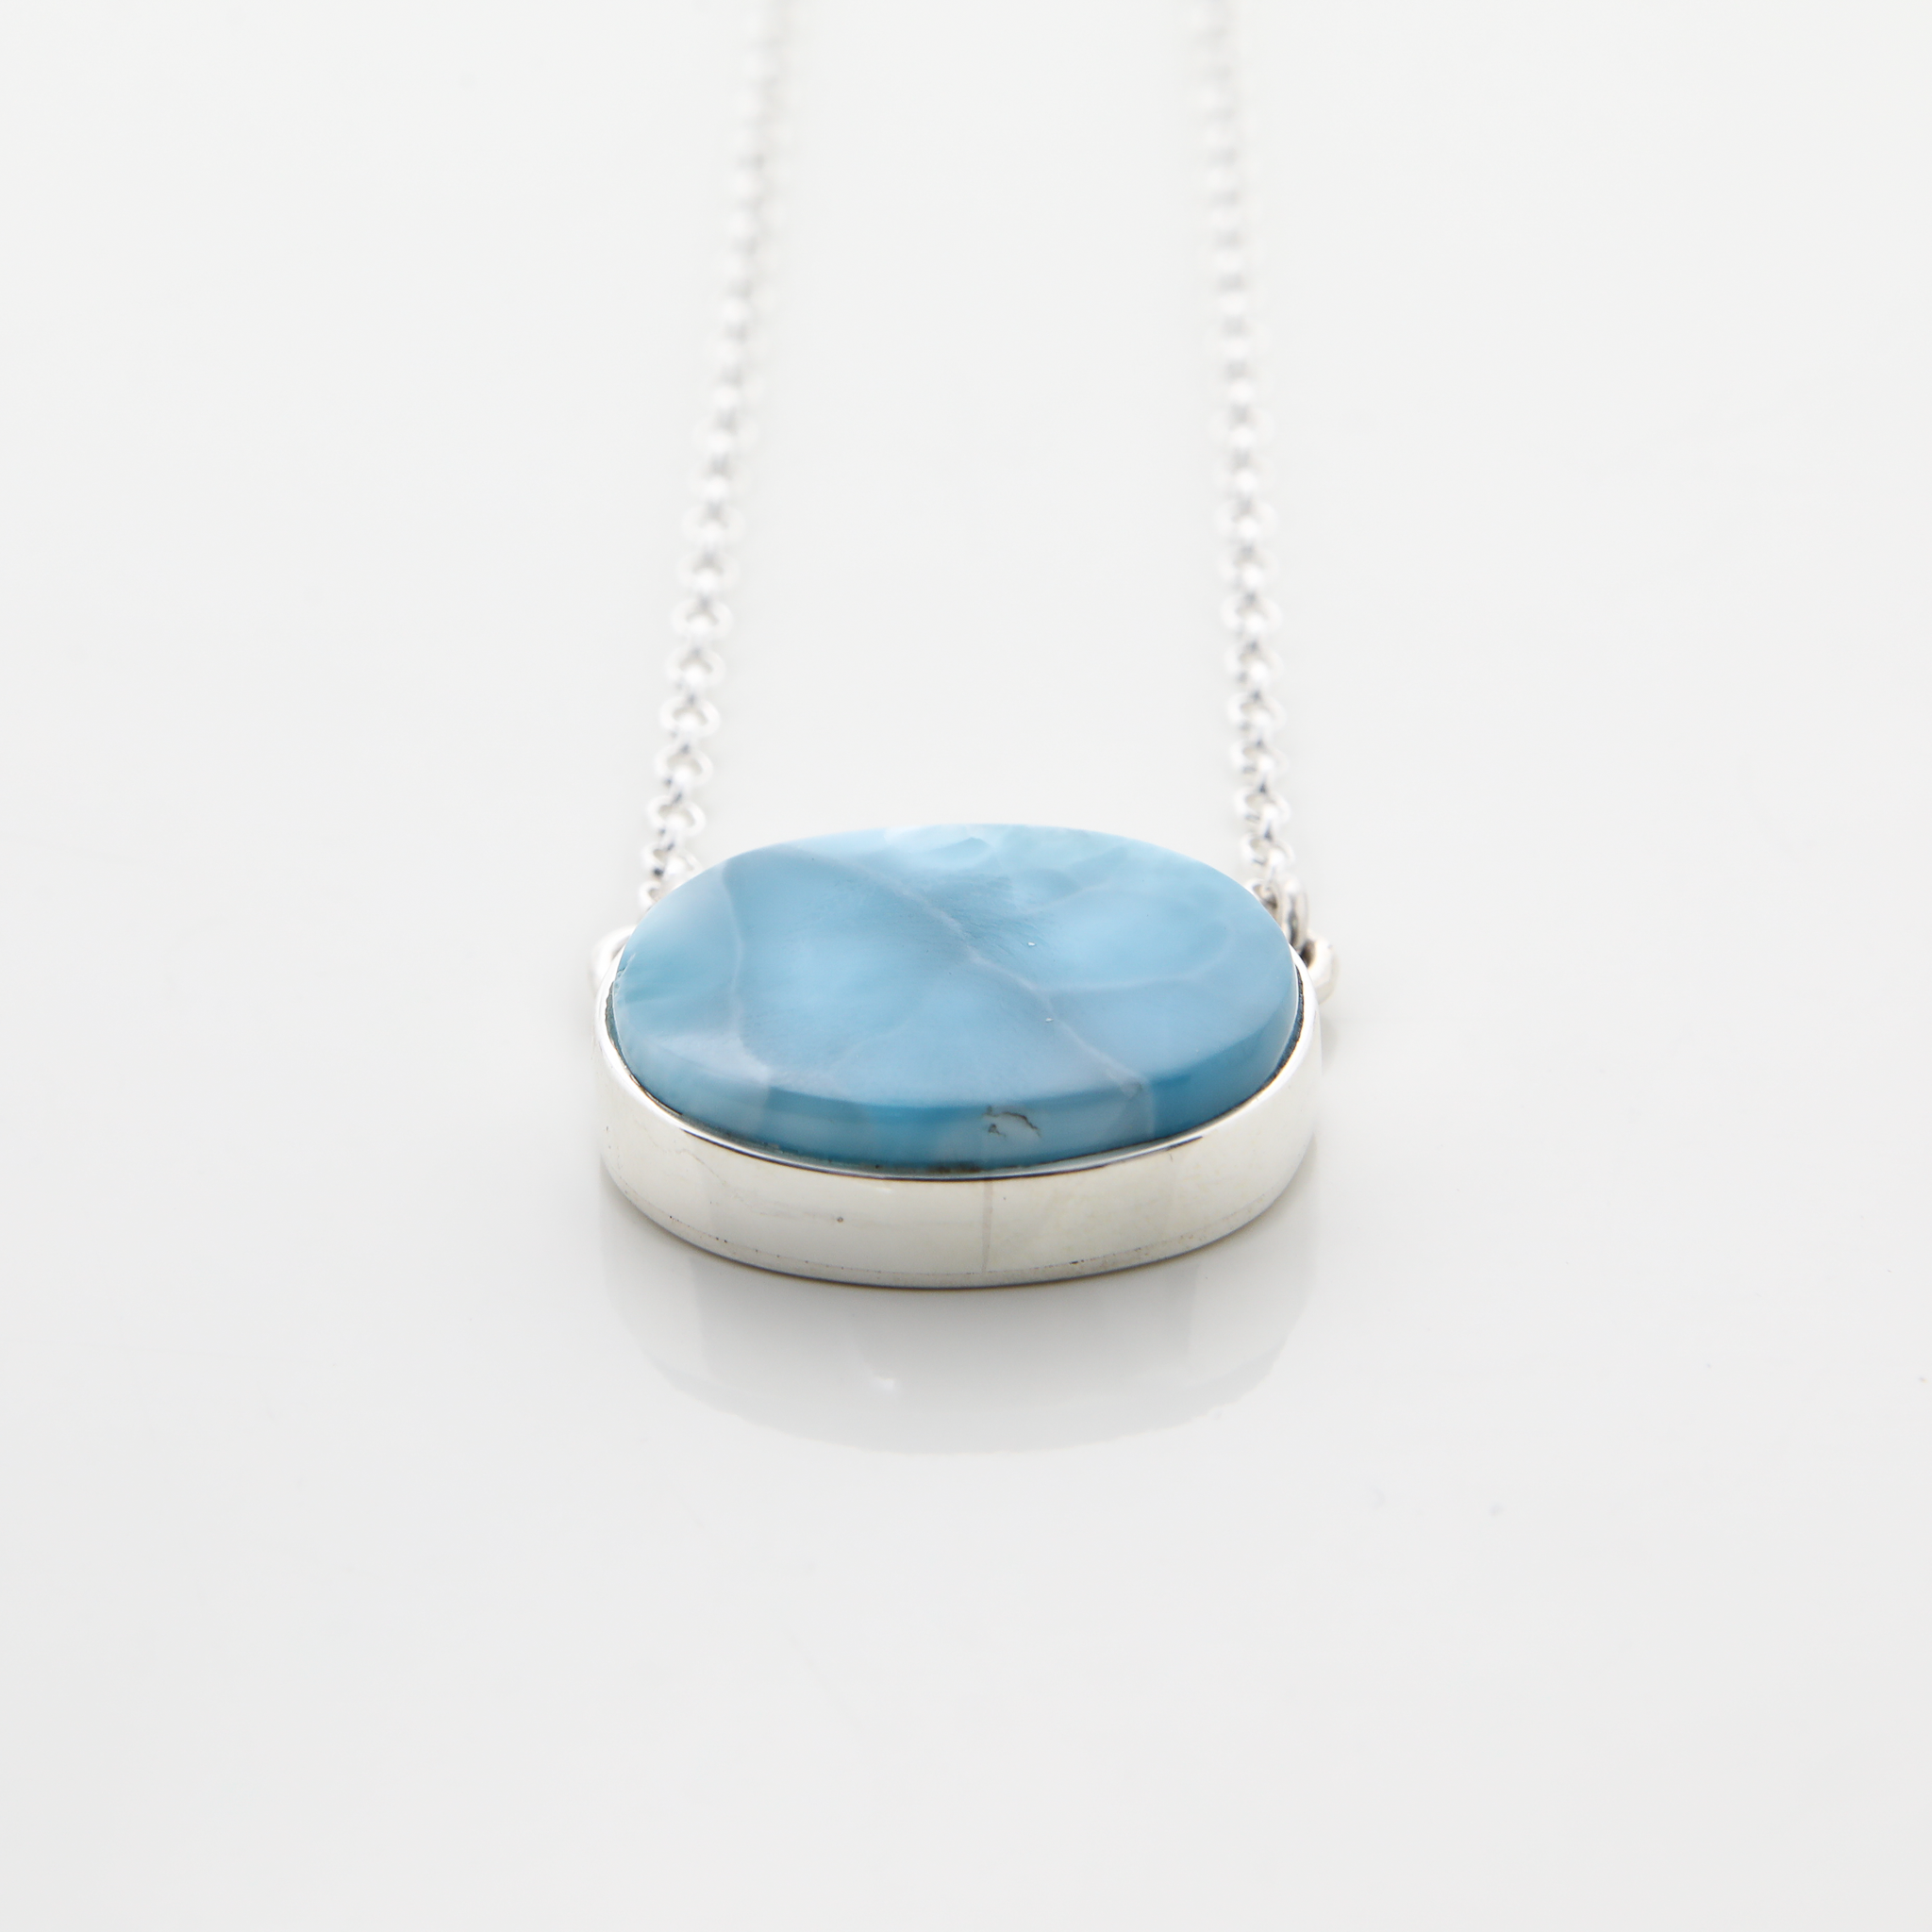 Larimar Oval Shaped Necklace 